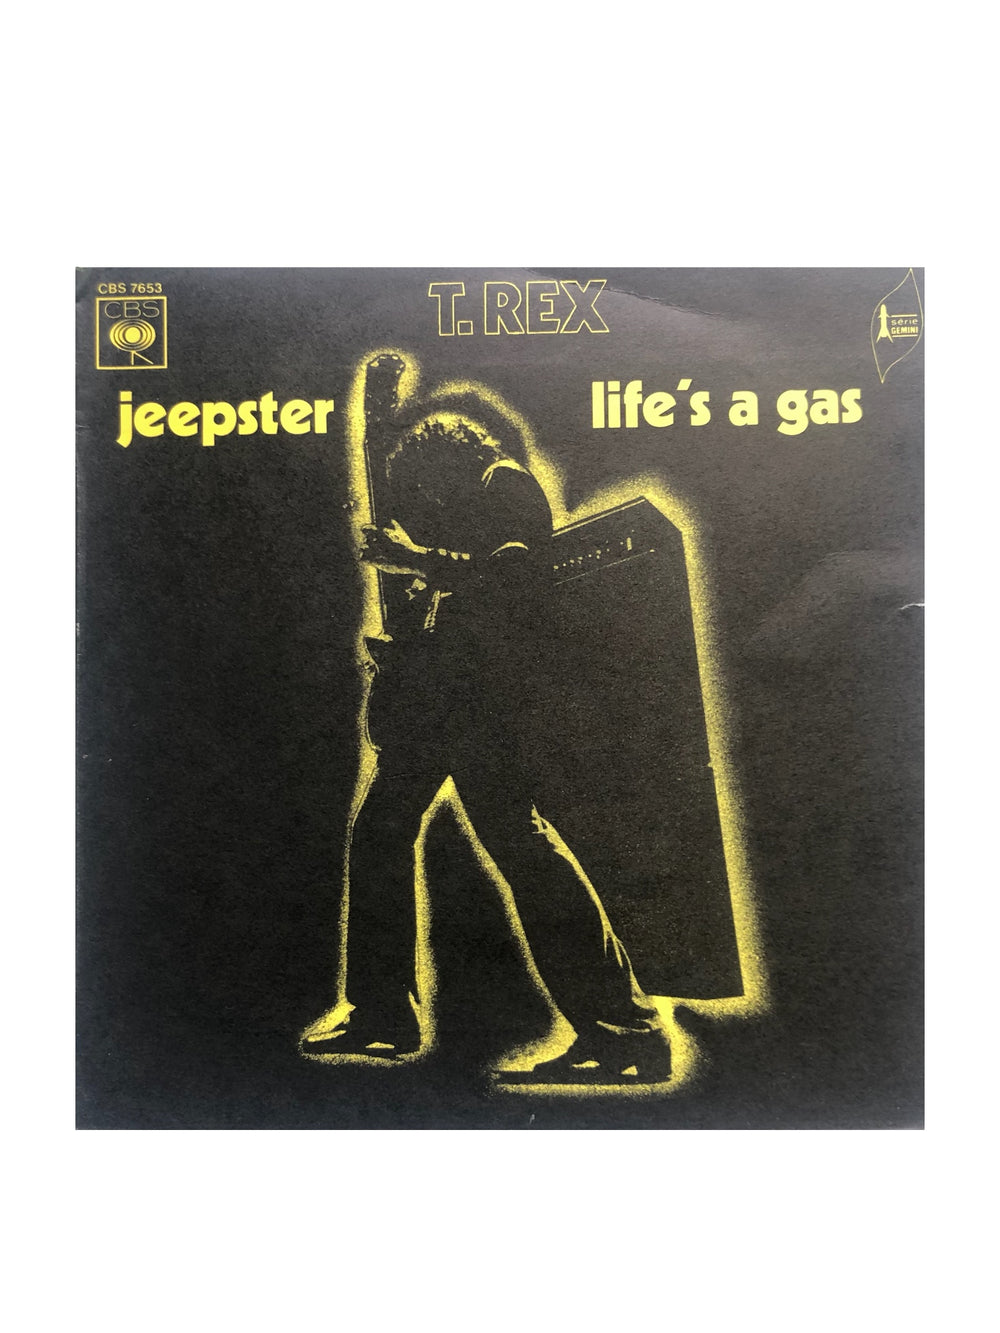 T. Rex ‎– Marc Bolan Jeepster / Life's A Gas 7 Inch Vinyl CBS 7653 France  Preloved: 1971